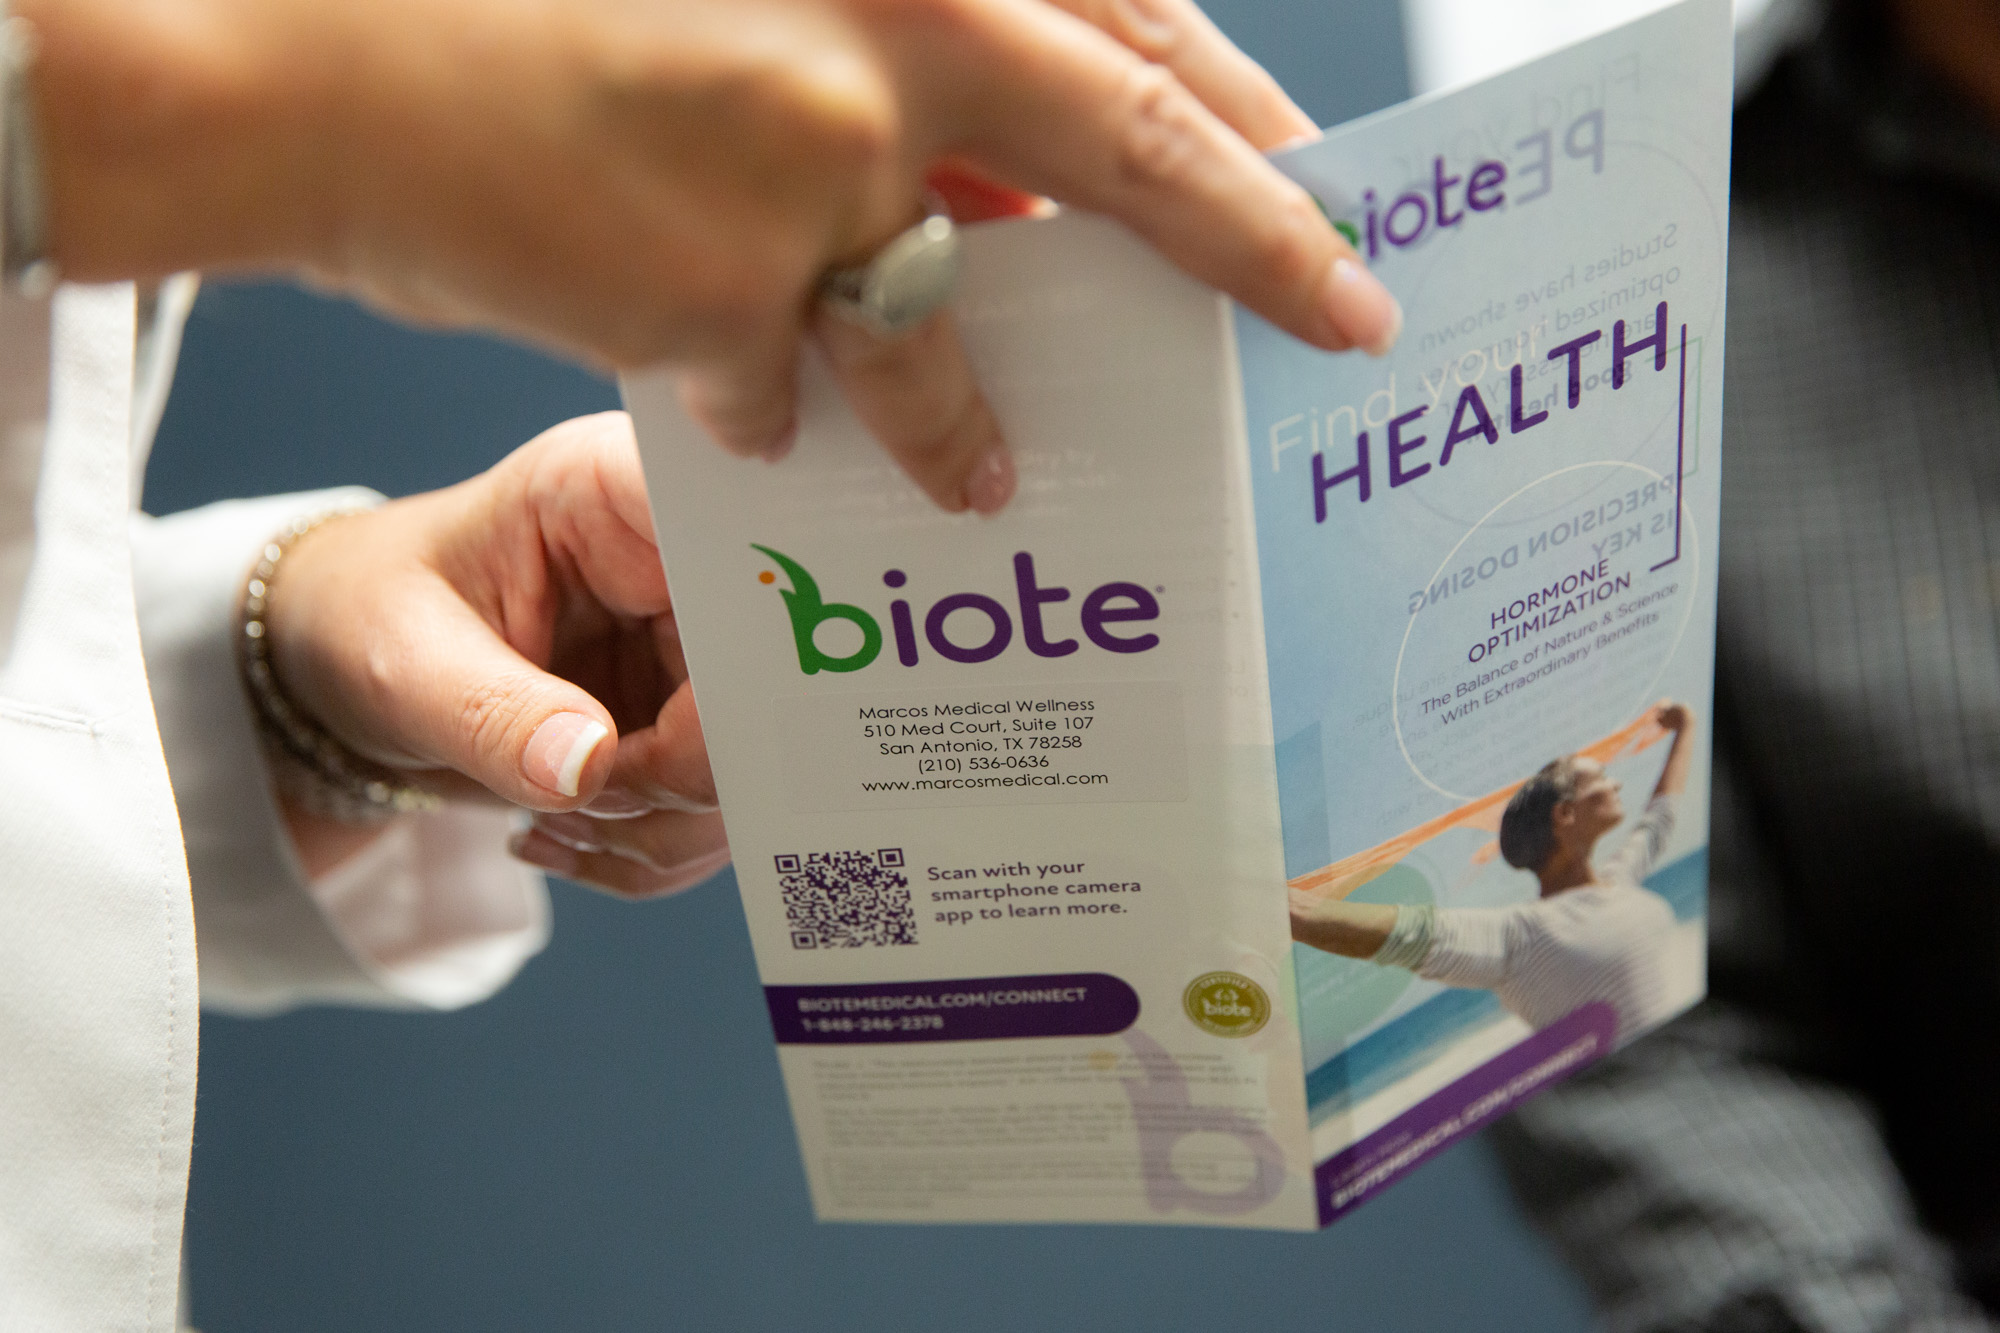 Marcos Medical Provider points to flyer describing hormone replacement therapy. The front of the flyer says Find your health - hormone optimization. The back of the flyer has the biote logo, Marcos Medical's address, and a QR code to scan with phone to learn more.